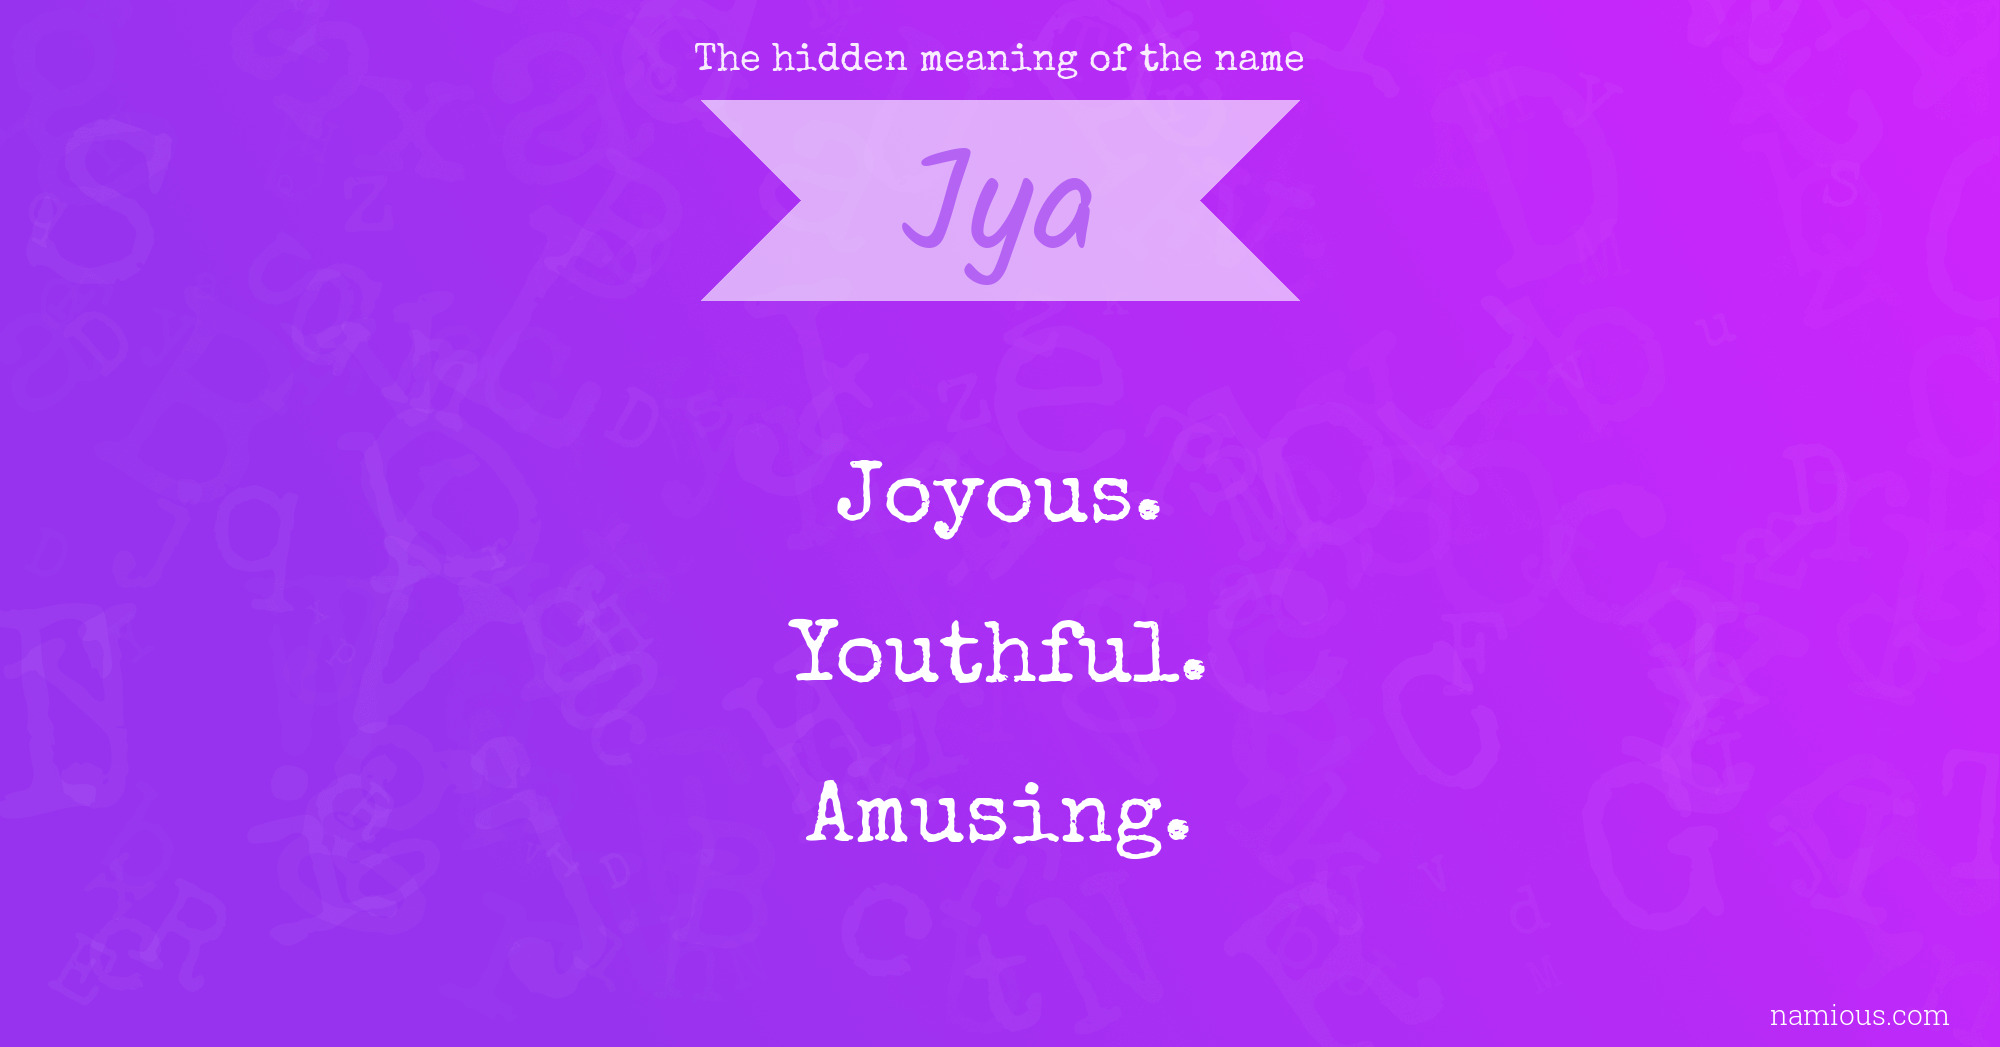 The hidden meaning of the name Jya